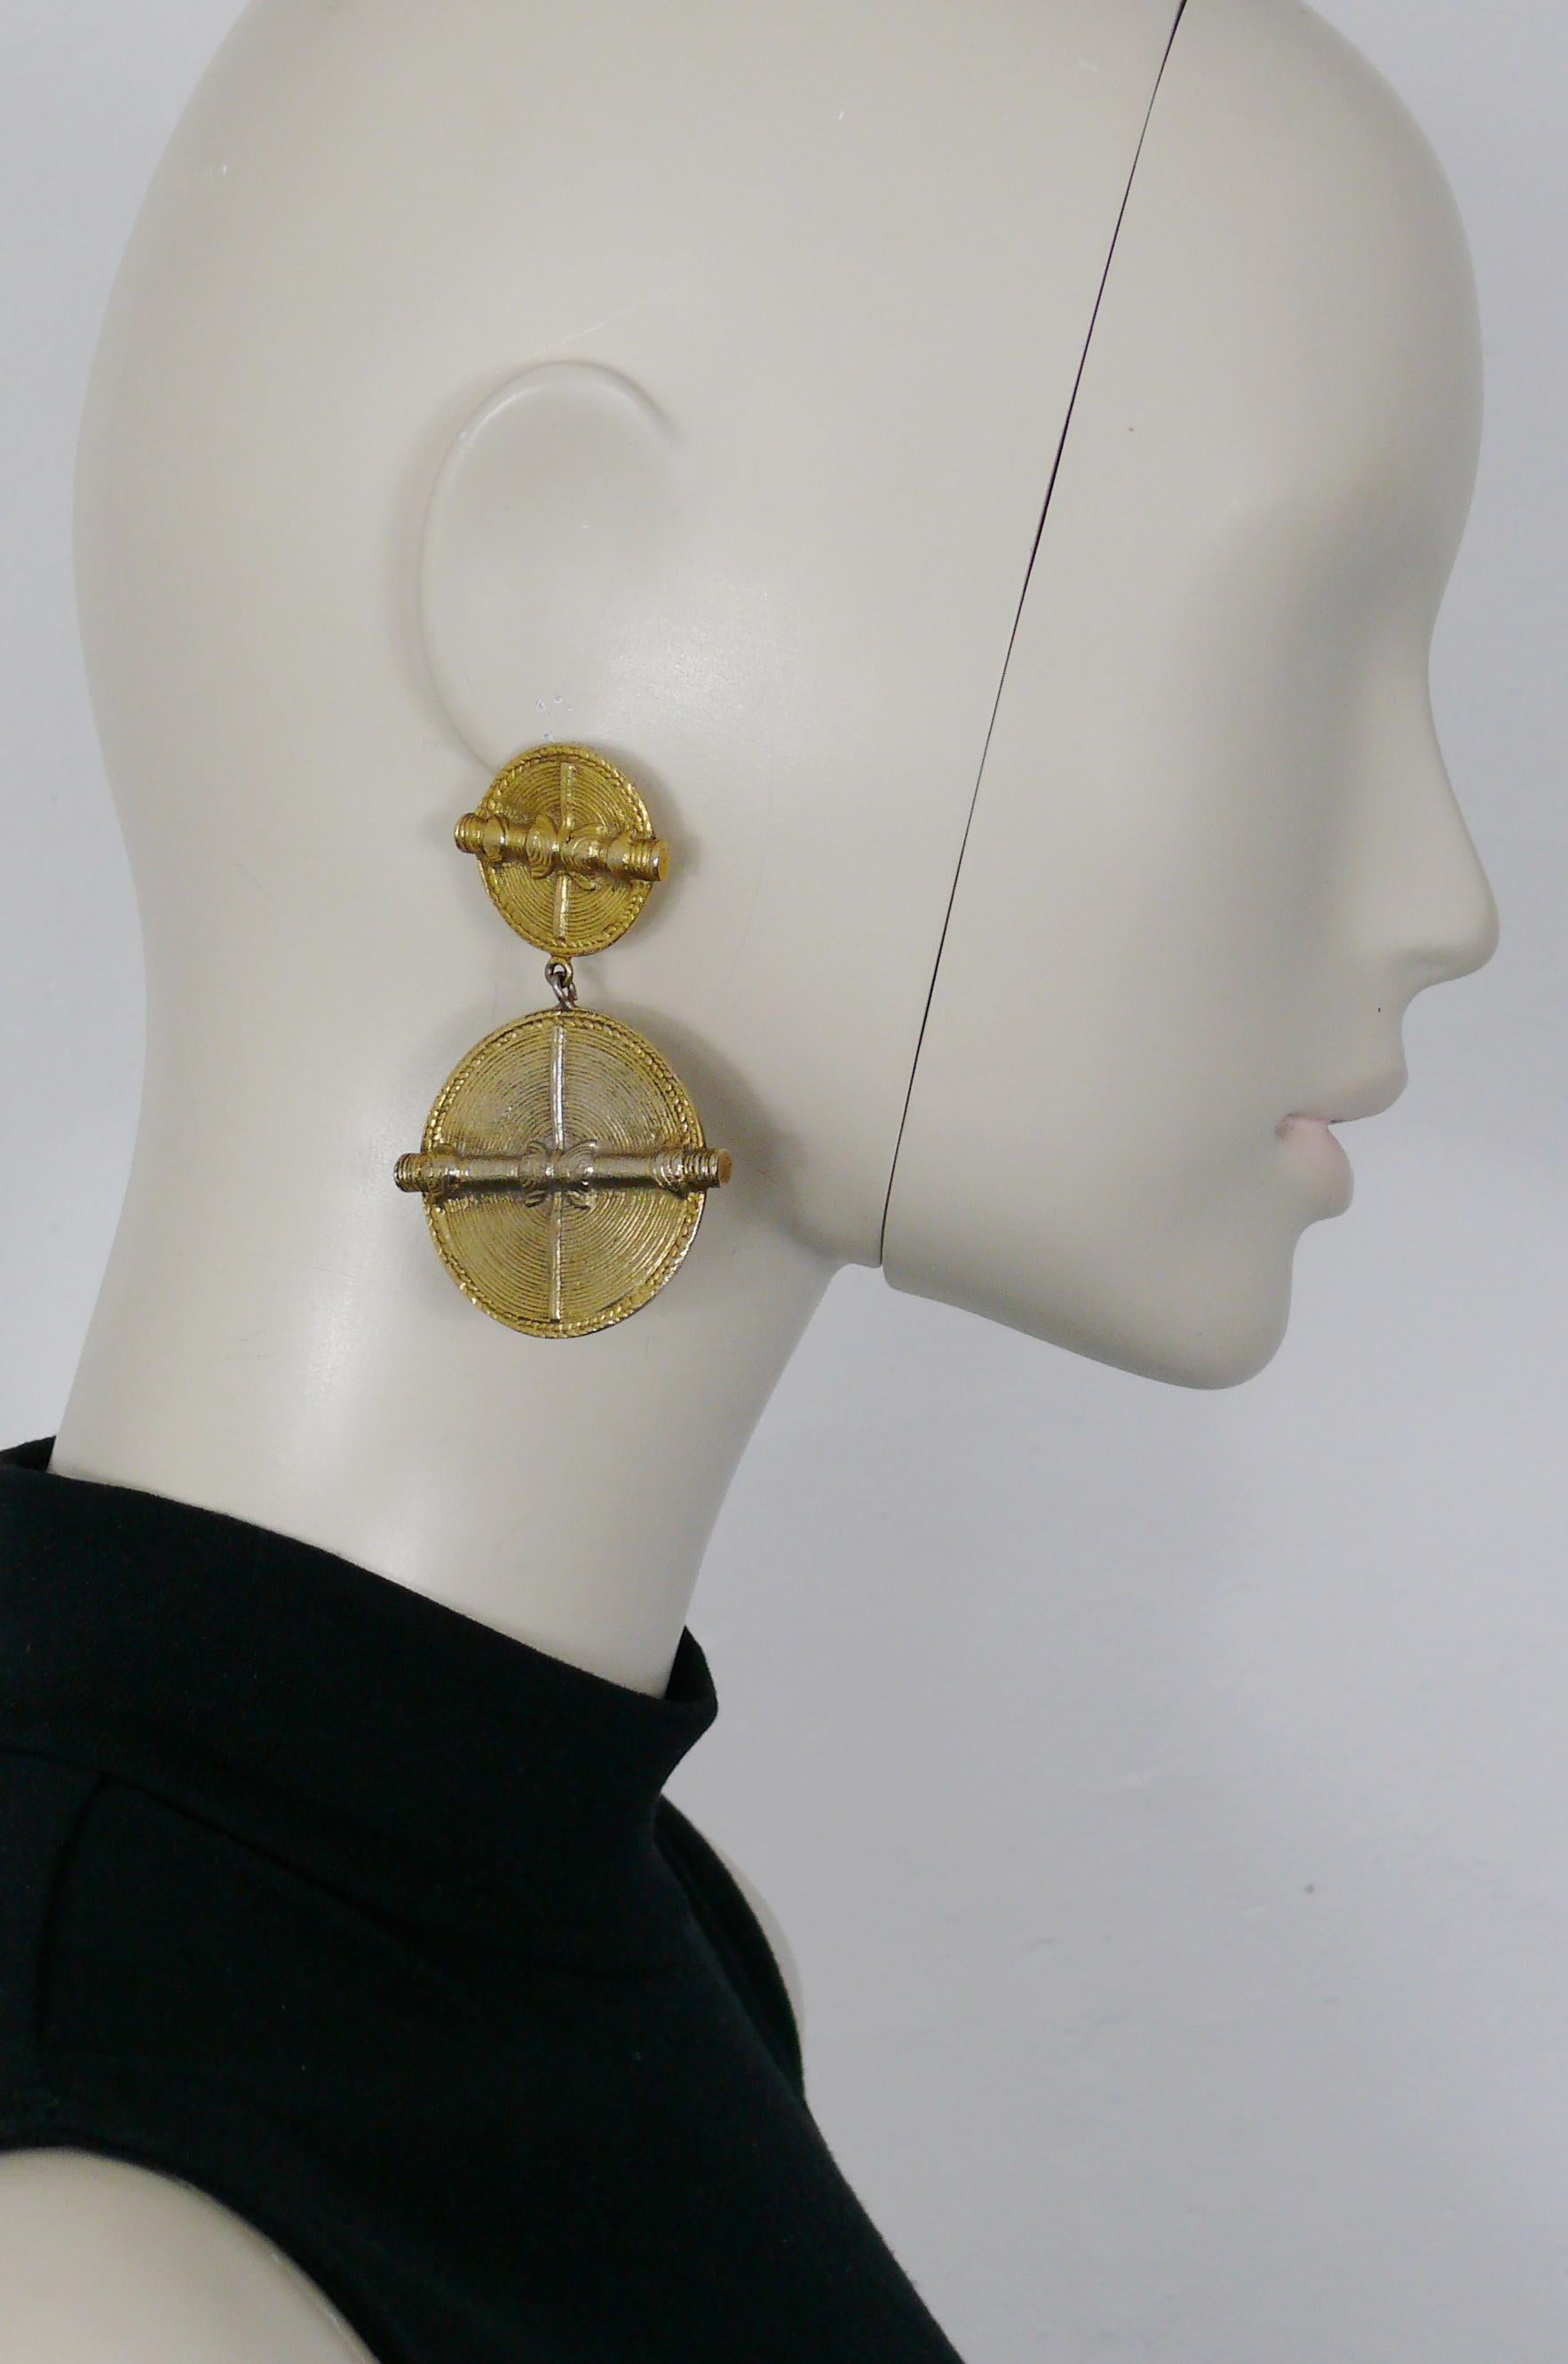 CHANEL vintage antiqued gold toned african inspired dangling earrings (clip-on) featuring two shields with concentric circle design. 

Embossed CHANEL.

Indicative measurements : height approx. 7.5 cm (2.95 inches) / max. width approx. 4.6 cm (1.81